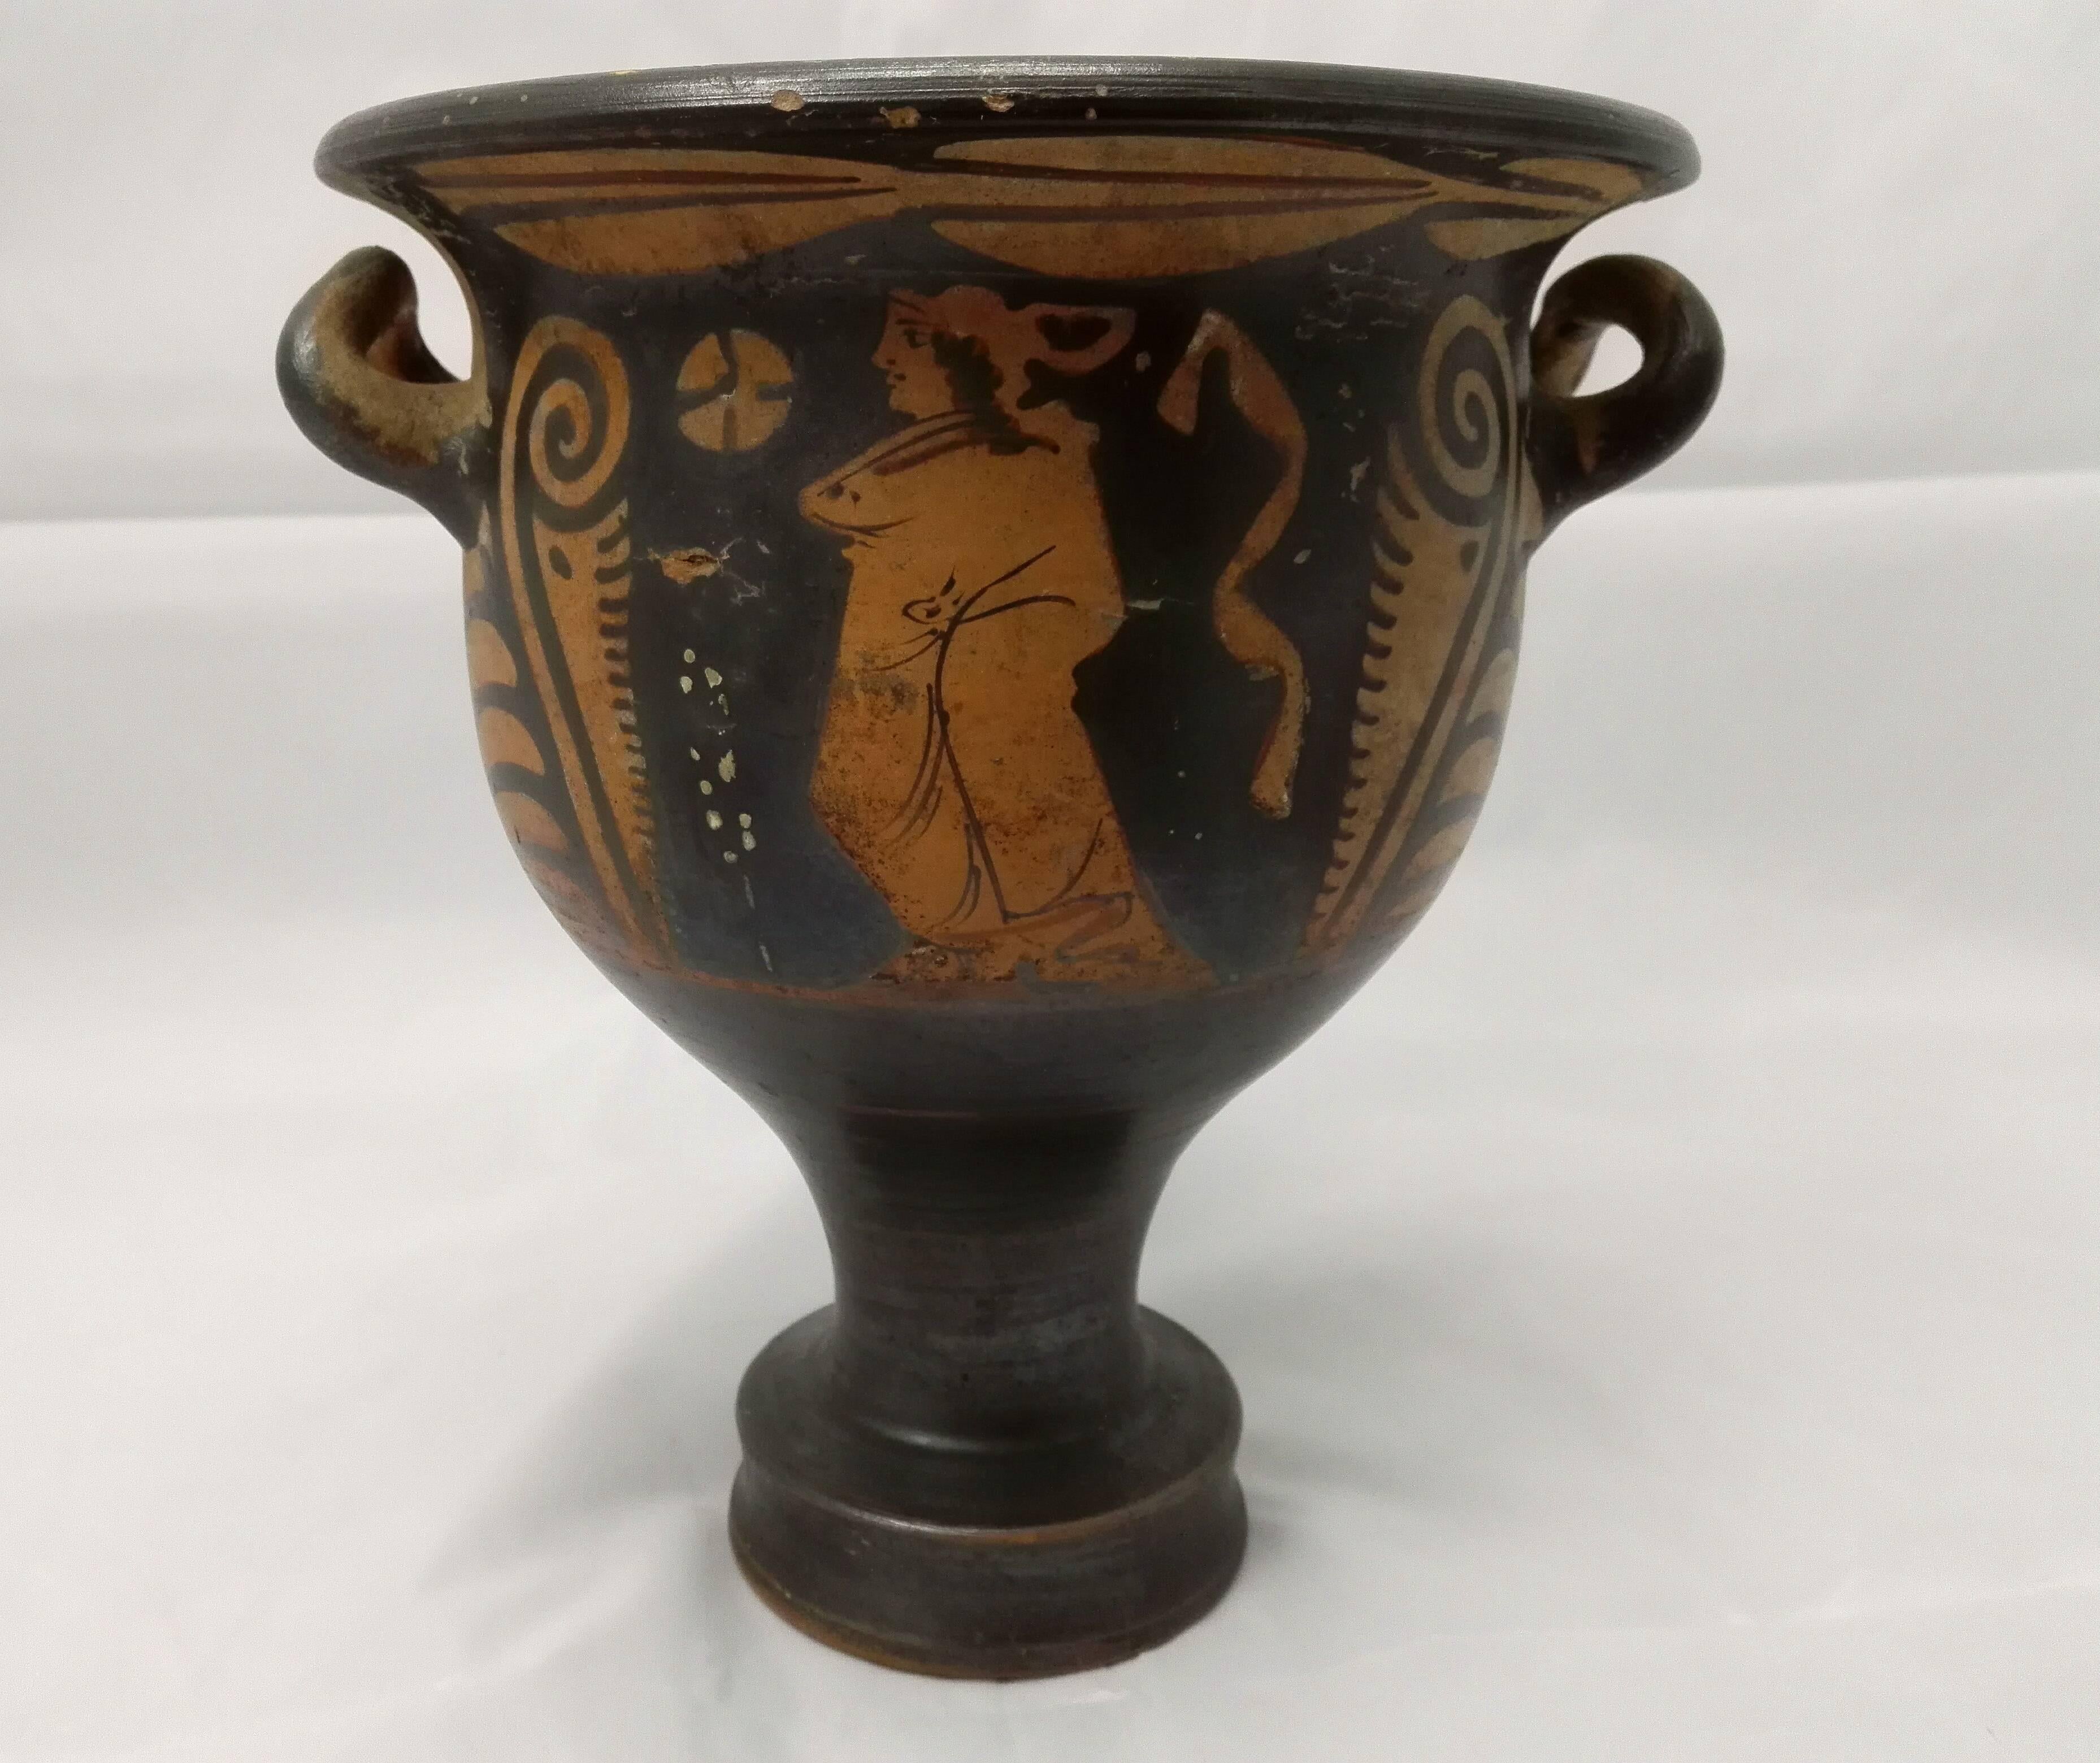 A very nice and important example, red-figure painted, pottery wine bowl. The wonderfully shaped foot carries the bell-shaped cup, which is provided in both sides with beautiful undamaged handles! The figurative painting is gorgeous and precise,